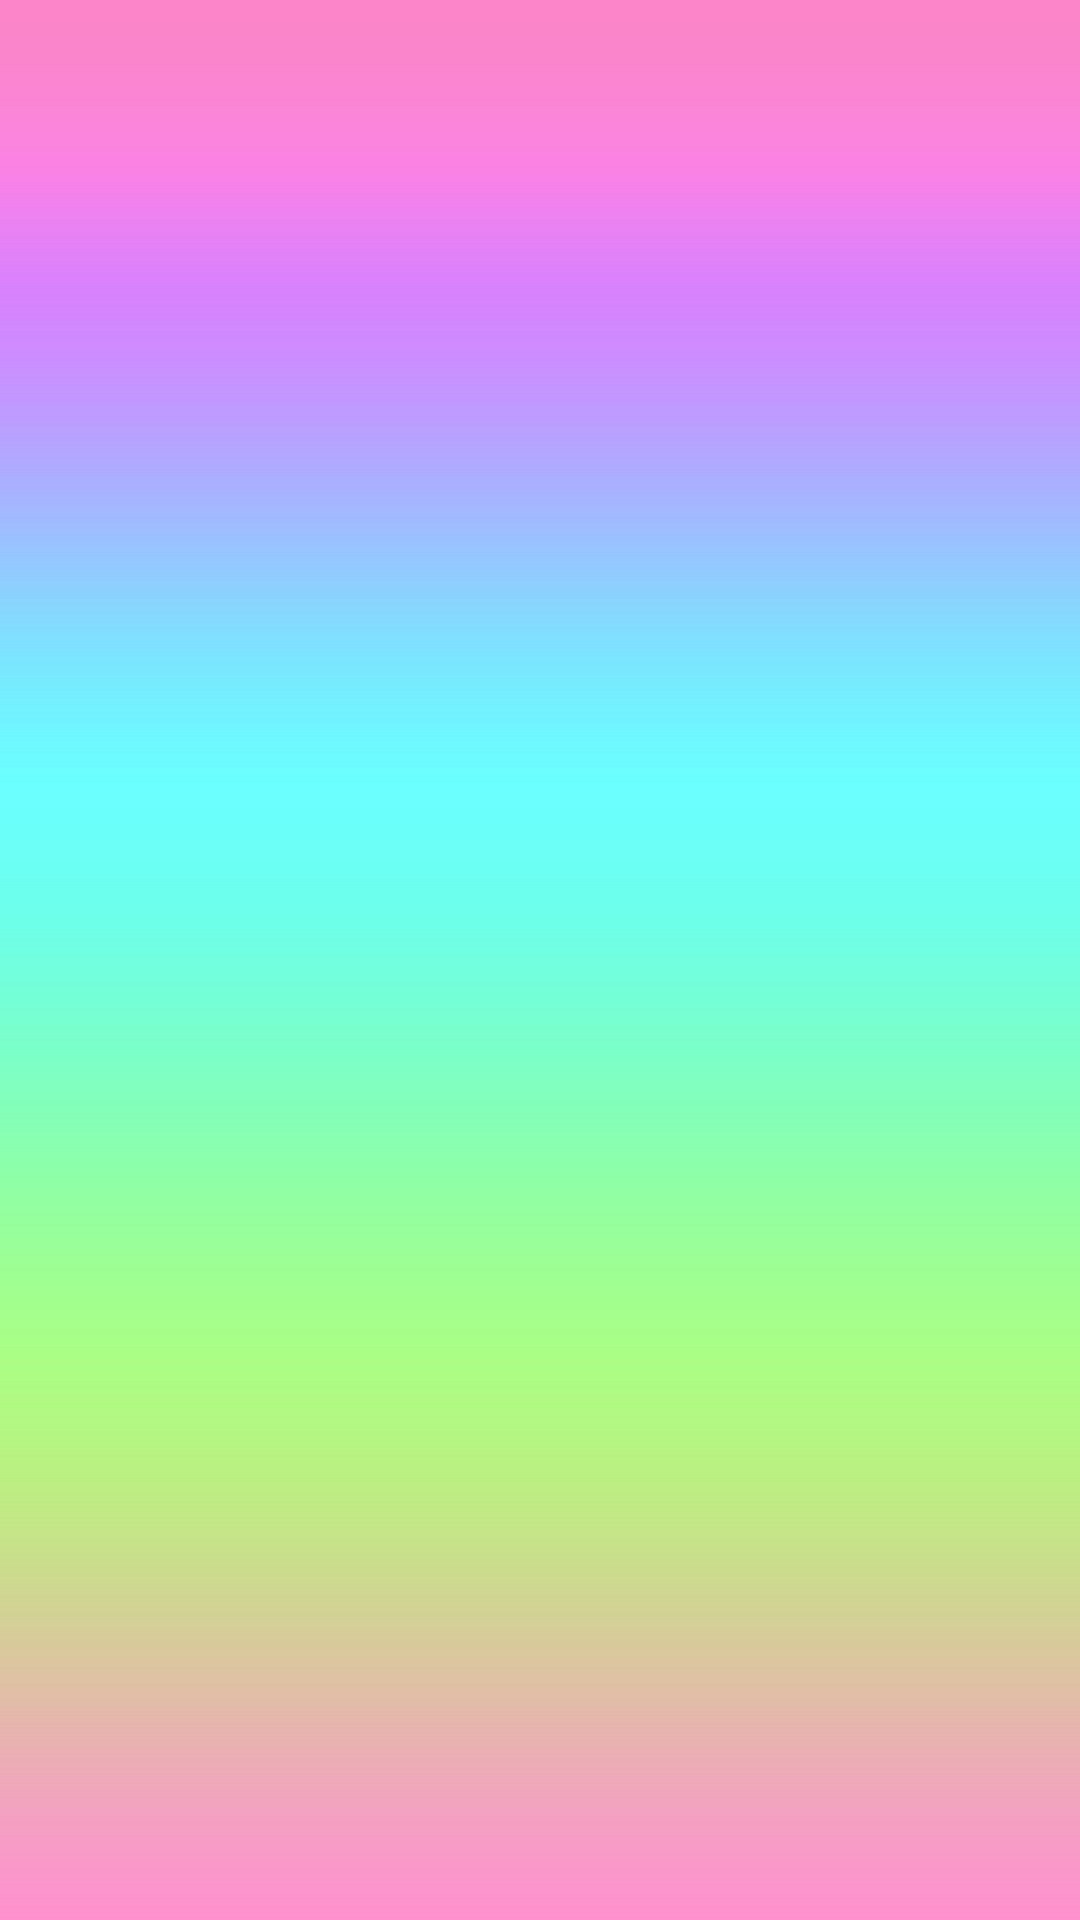 Rainbow Colors Wallpaper For Android With Image Resolution - Pastel Rainbow  Wallpaper Hd - 1080x1920 Wallpaper 